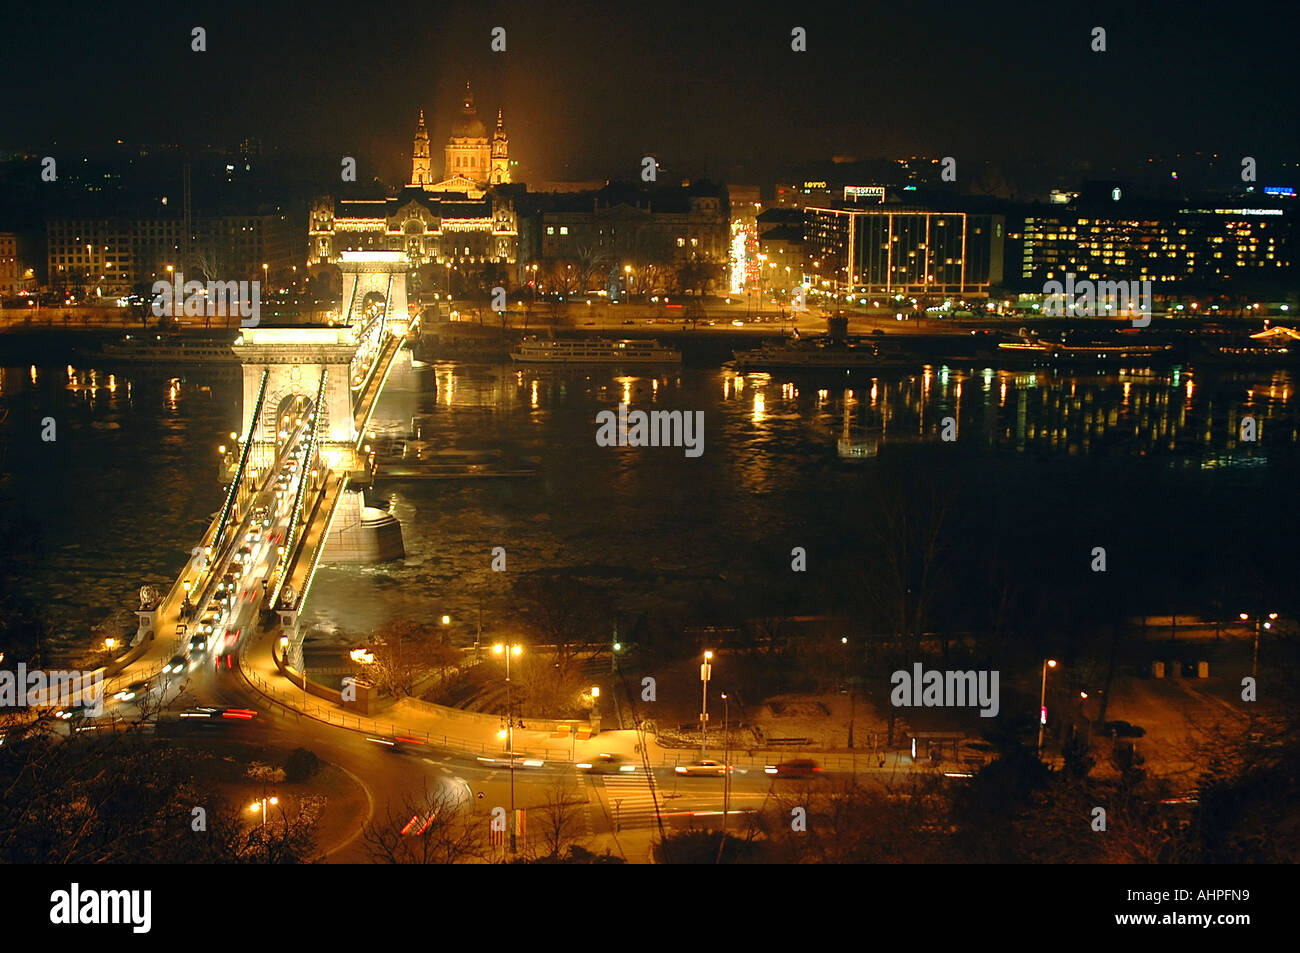 Horizontal wide angle aerial view of the River Danube and the Chain Bridge lit up at night. Stock Photo